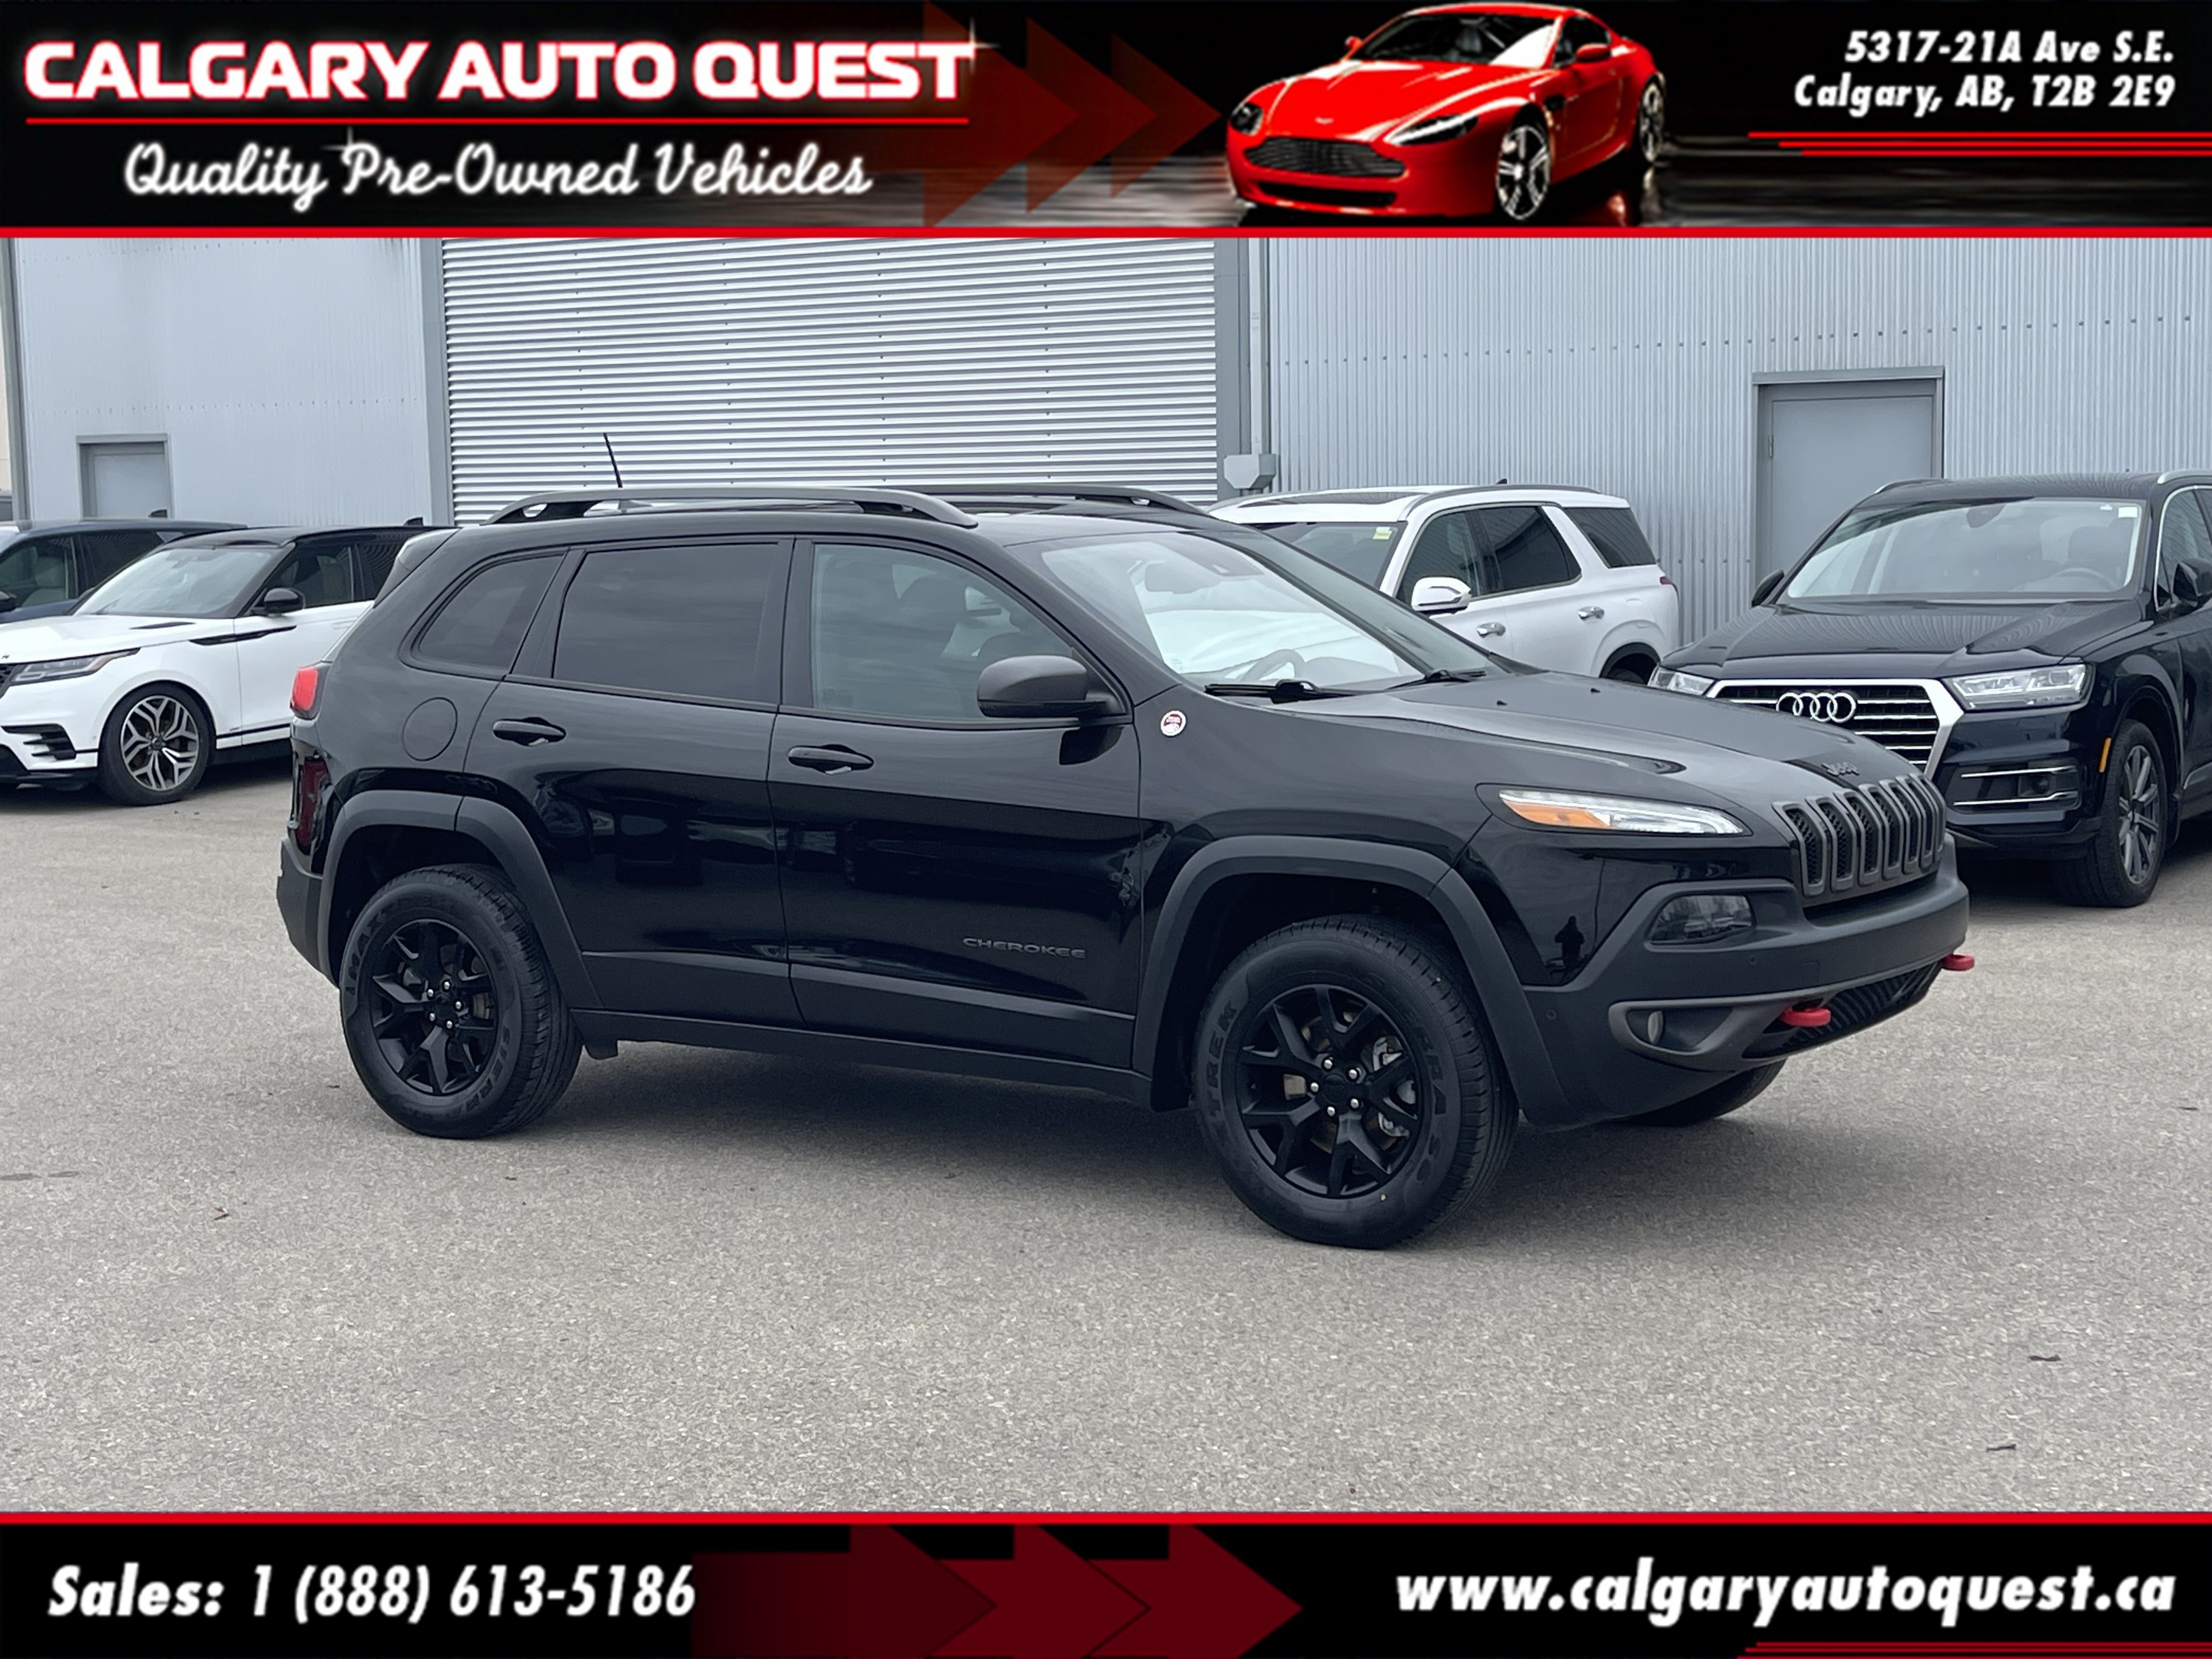 2017 Jeep Cherokee 4WD 4dr Trailhawk NAVI/B.CAM/LEATHER/PANOROOF